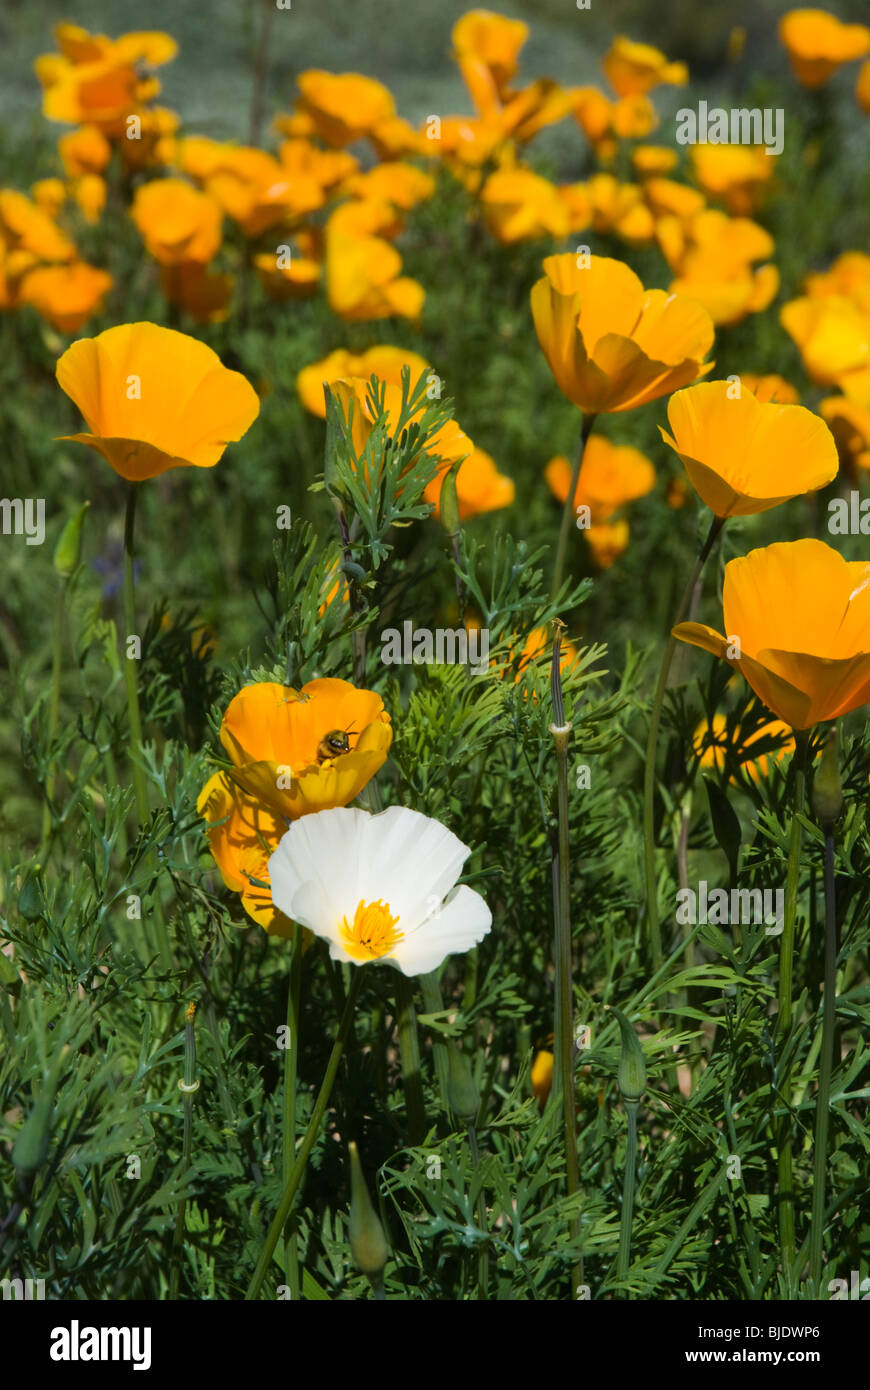 California Poppies, a wildflower in the Arizona desert at springtime.  This photo contains an example of the rare white mutant. Stock Photo